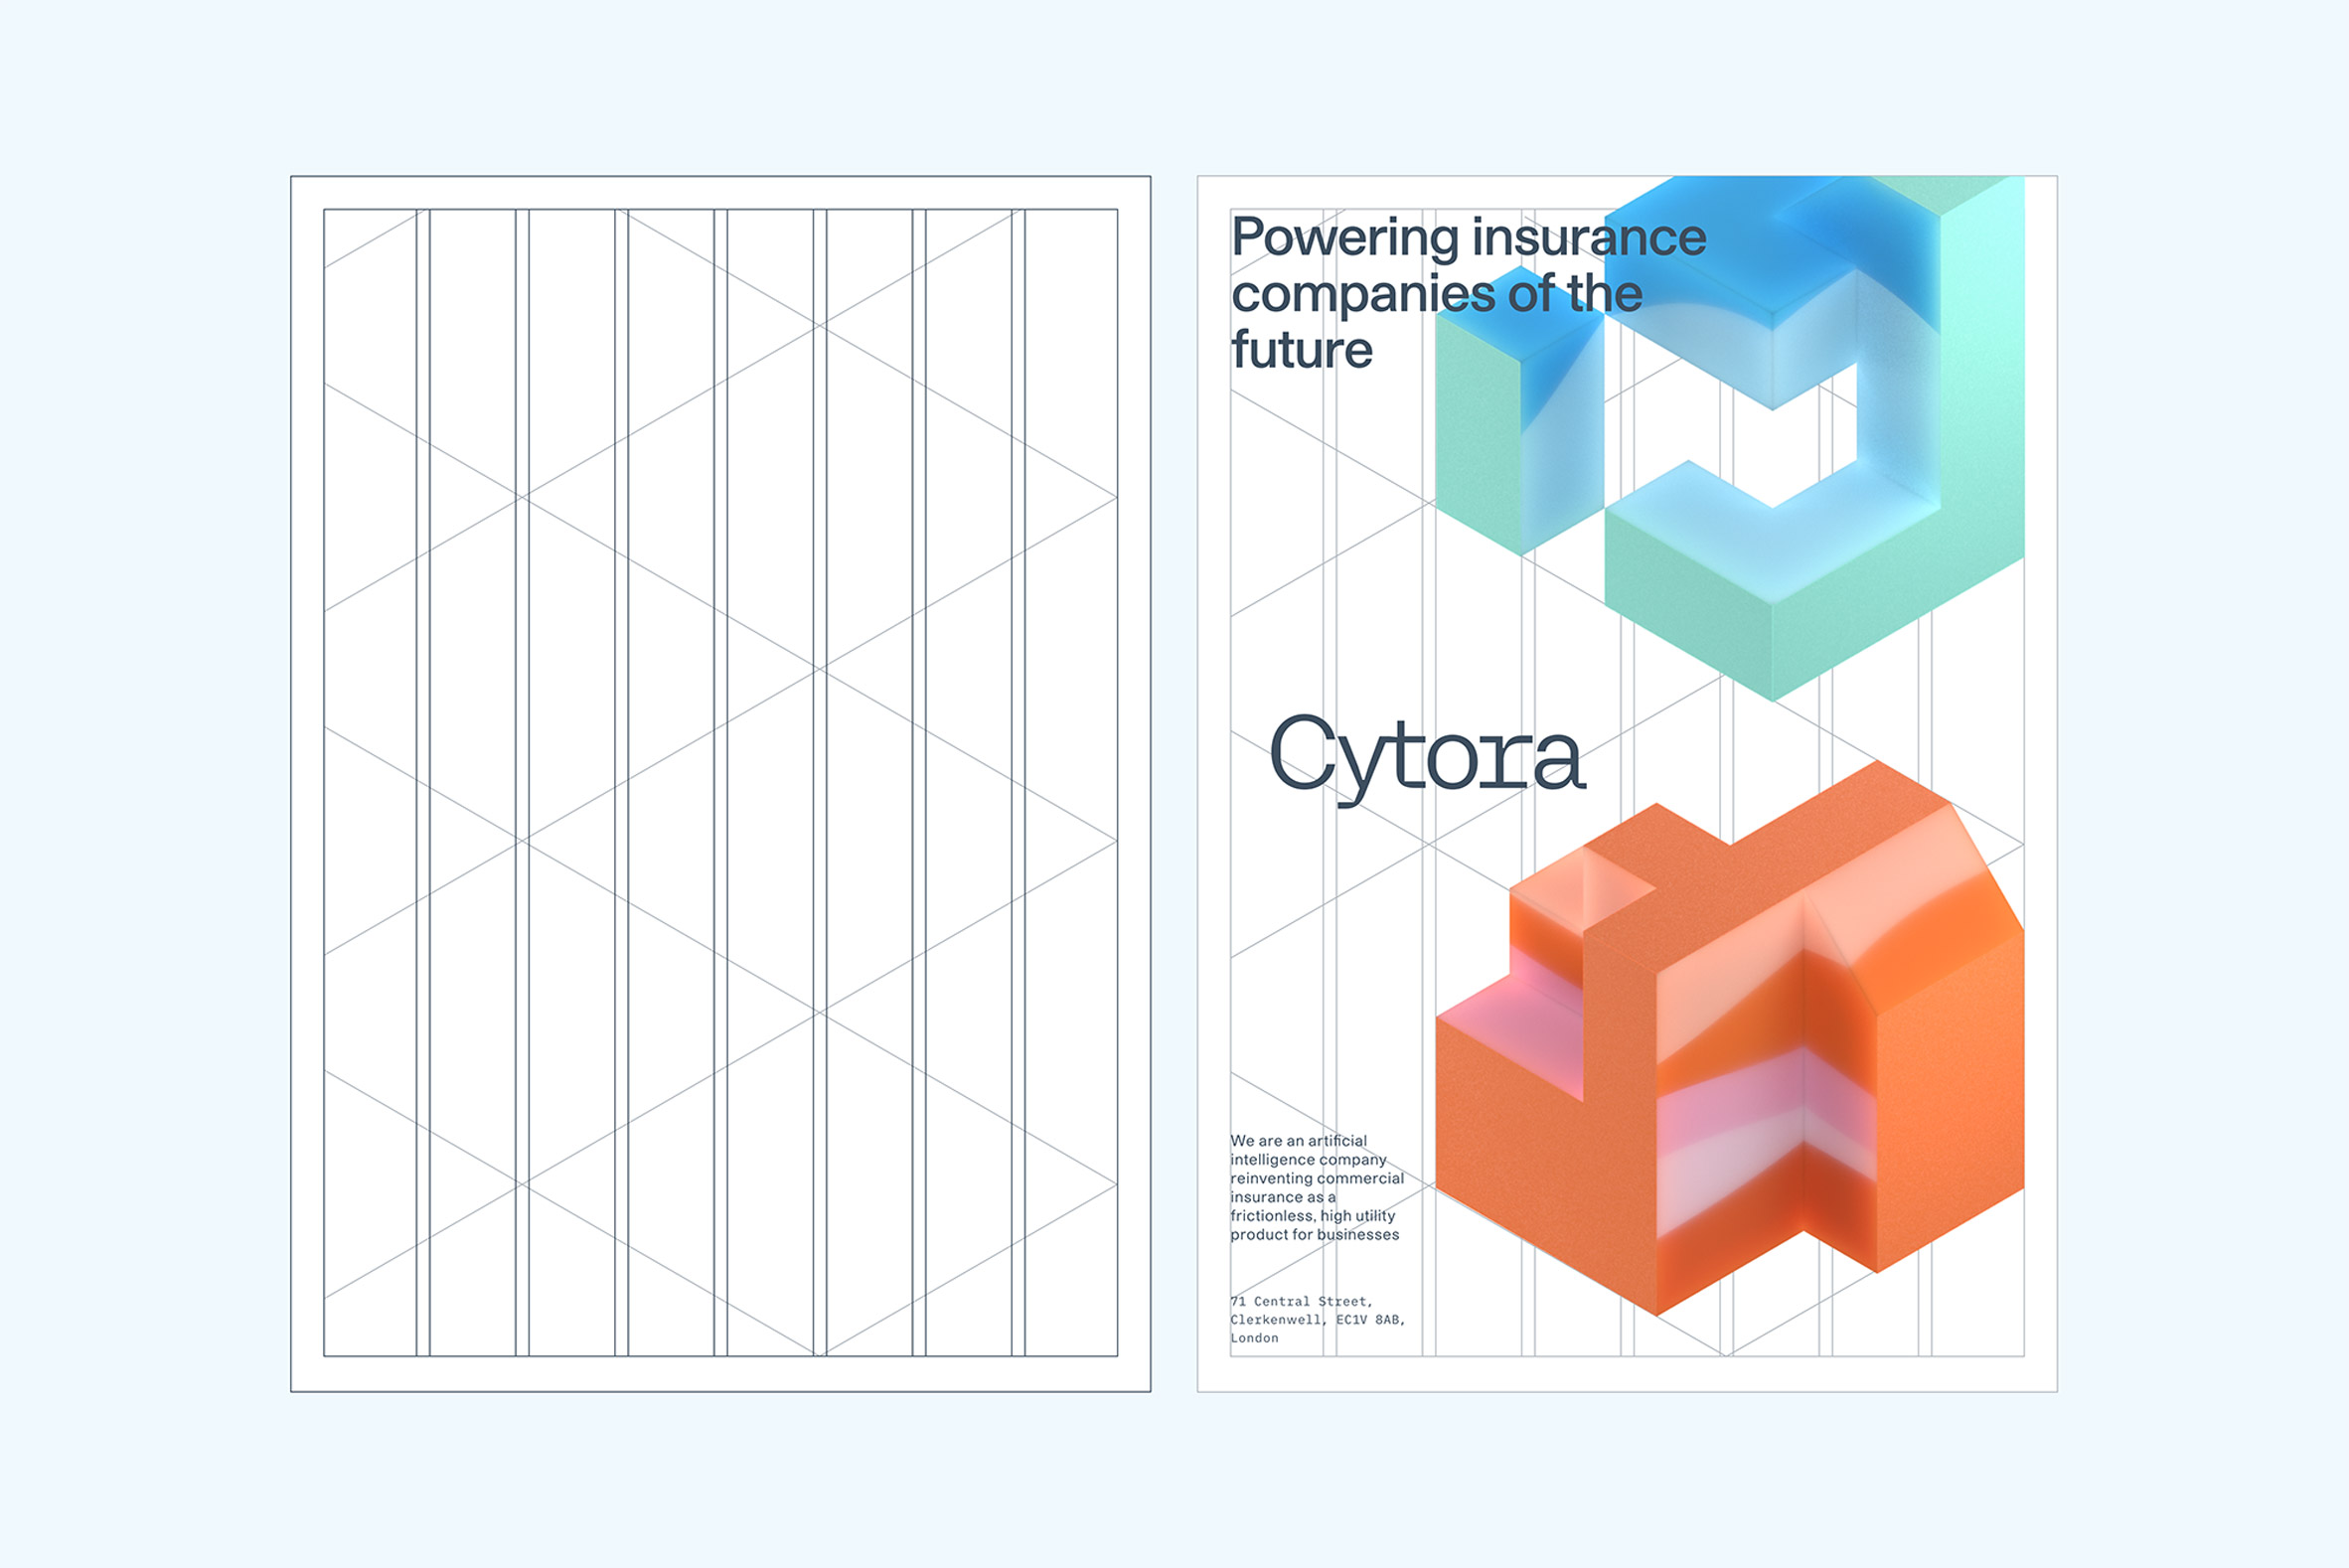 Pentagram creates ever-evolving brand identity "sculpted by the continuous flow of data"